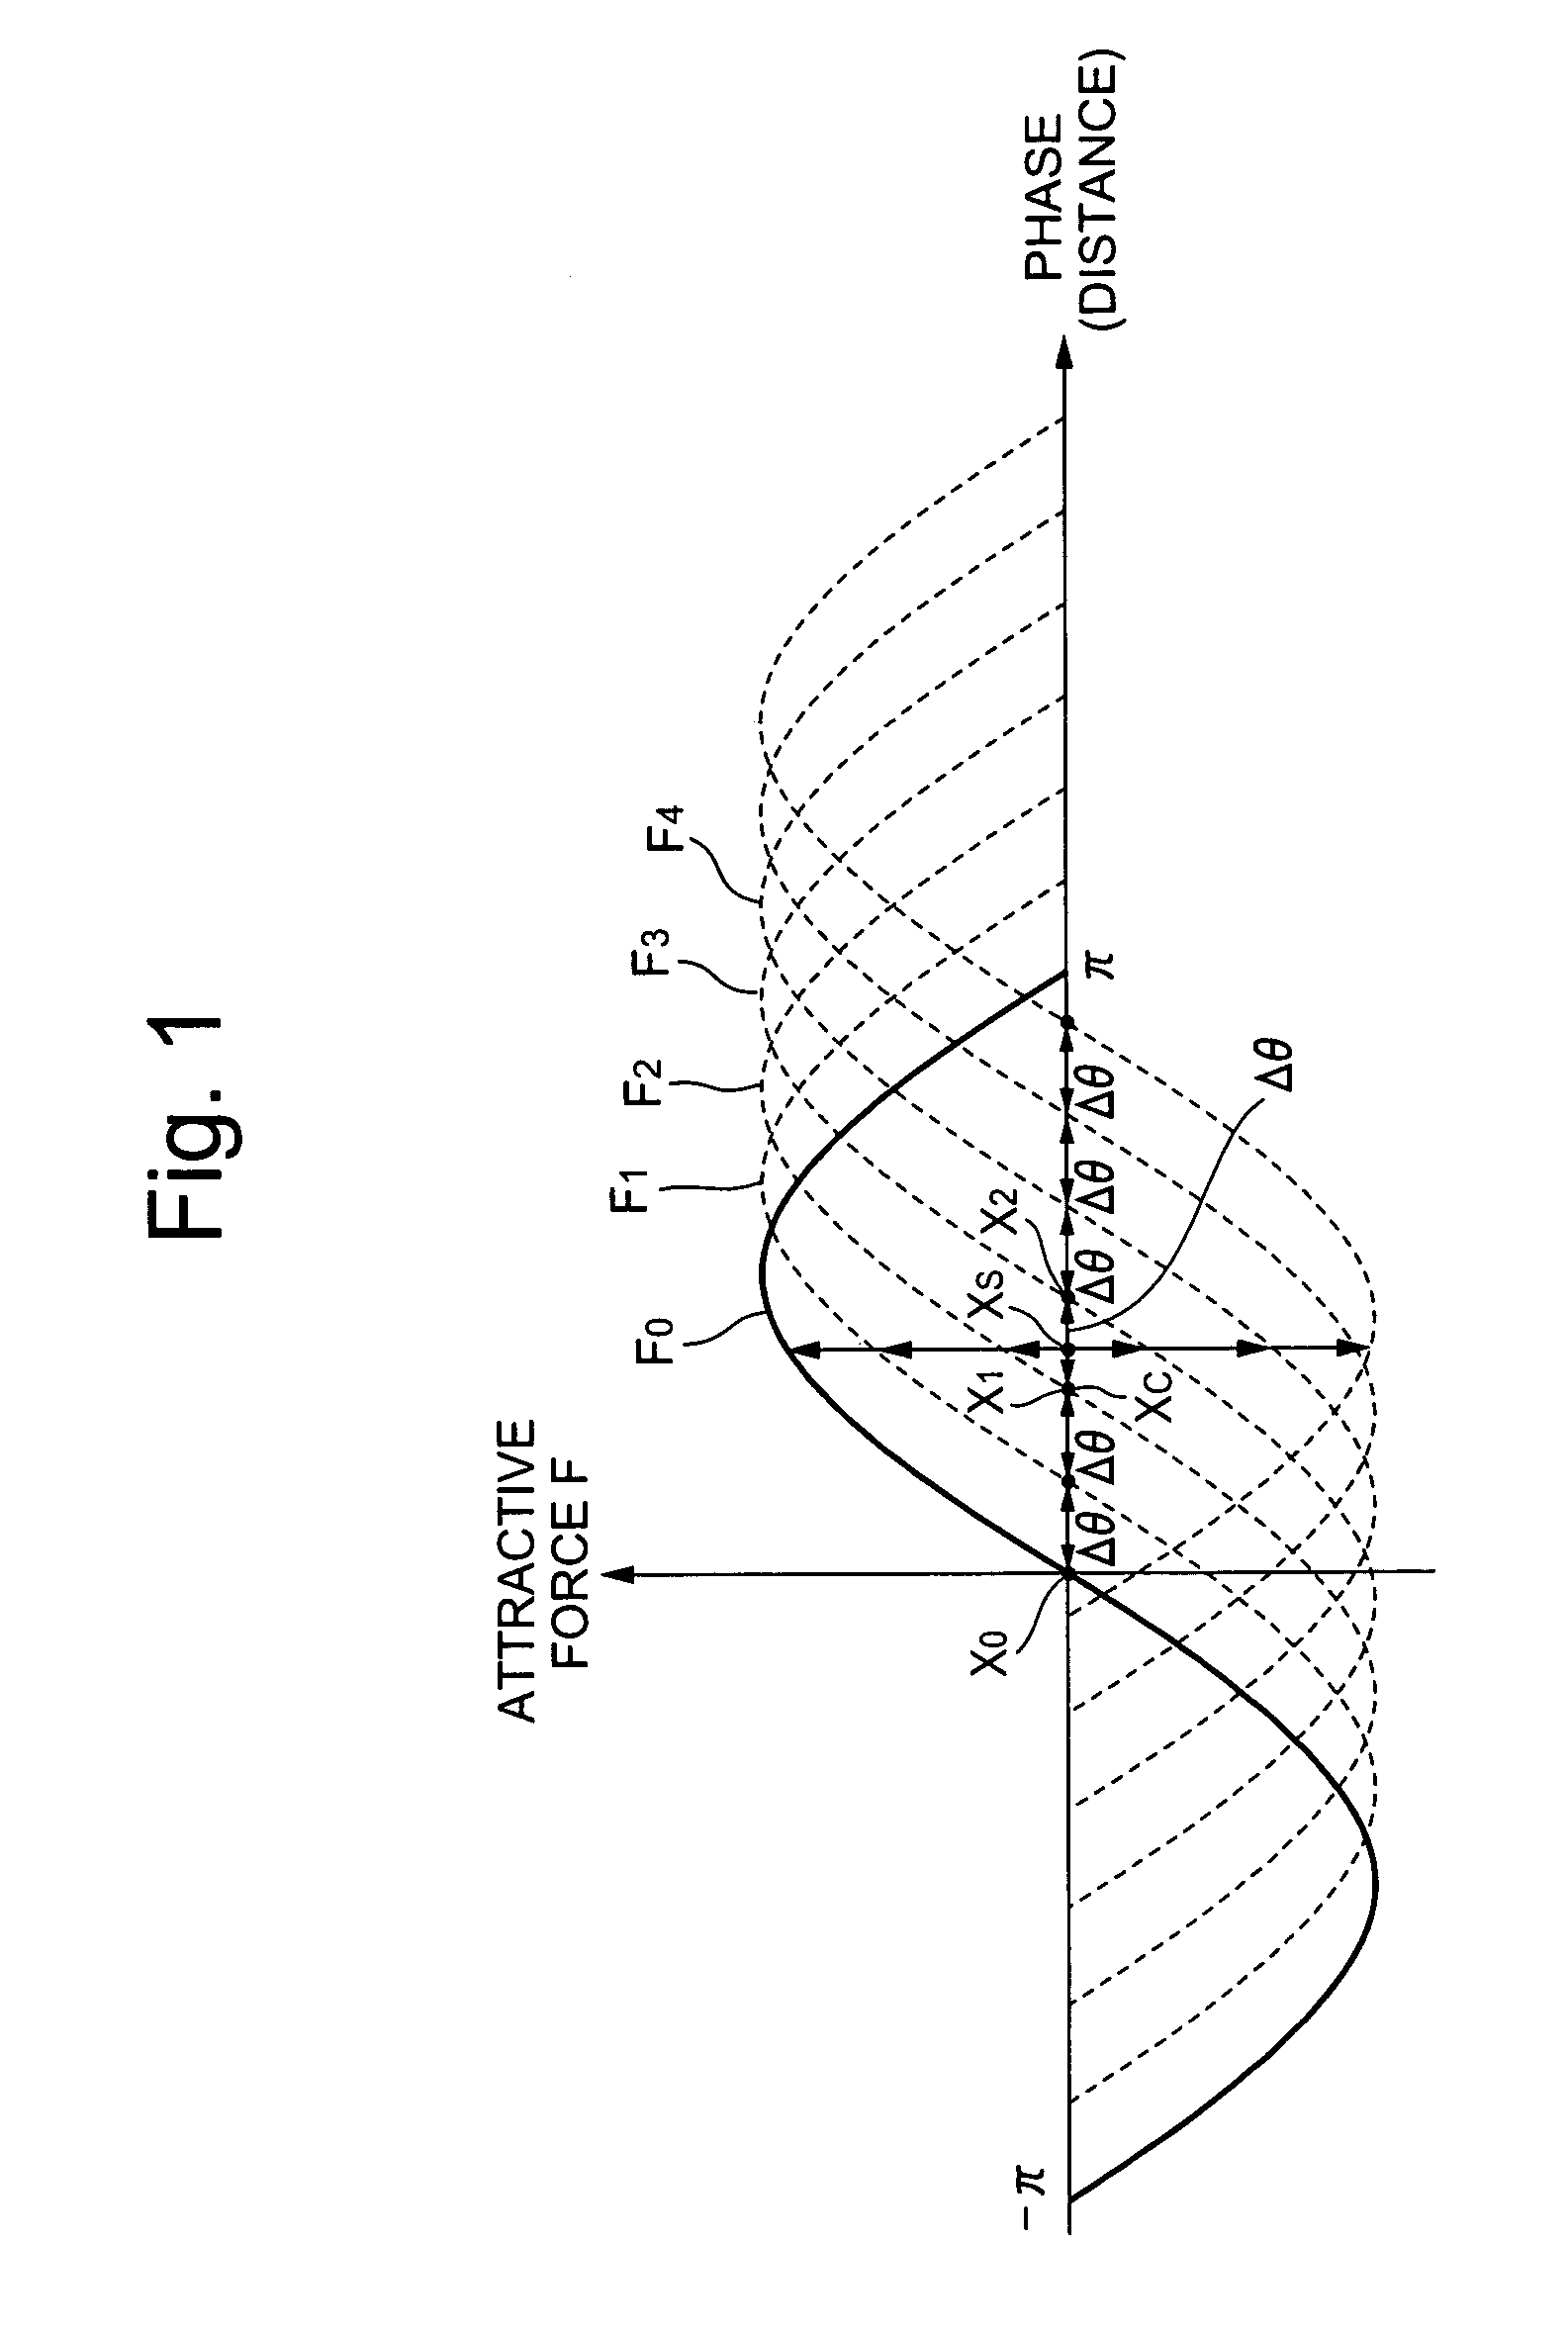 Magnetic-pole detecting system for synchronous AC motor and magnetic-pole detecting method therefor